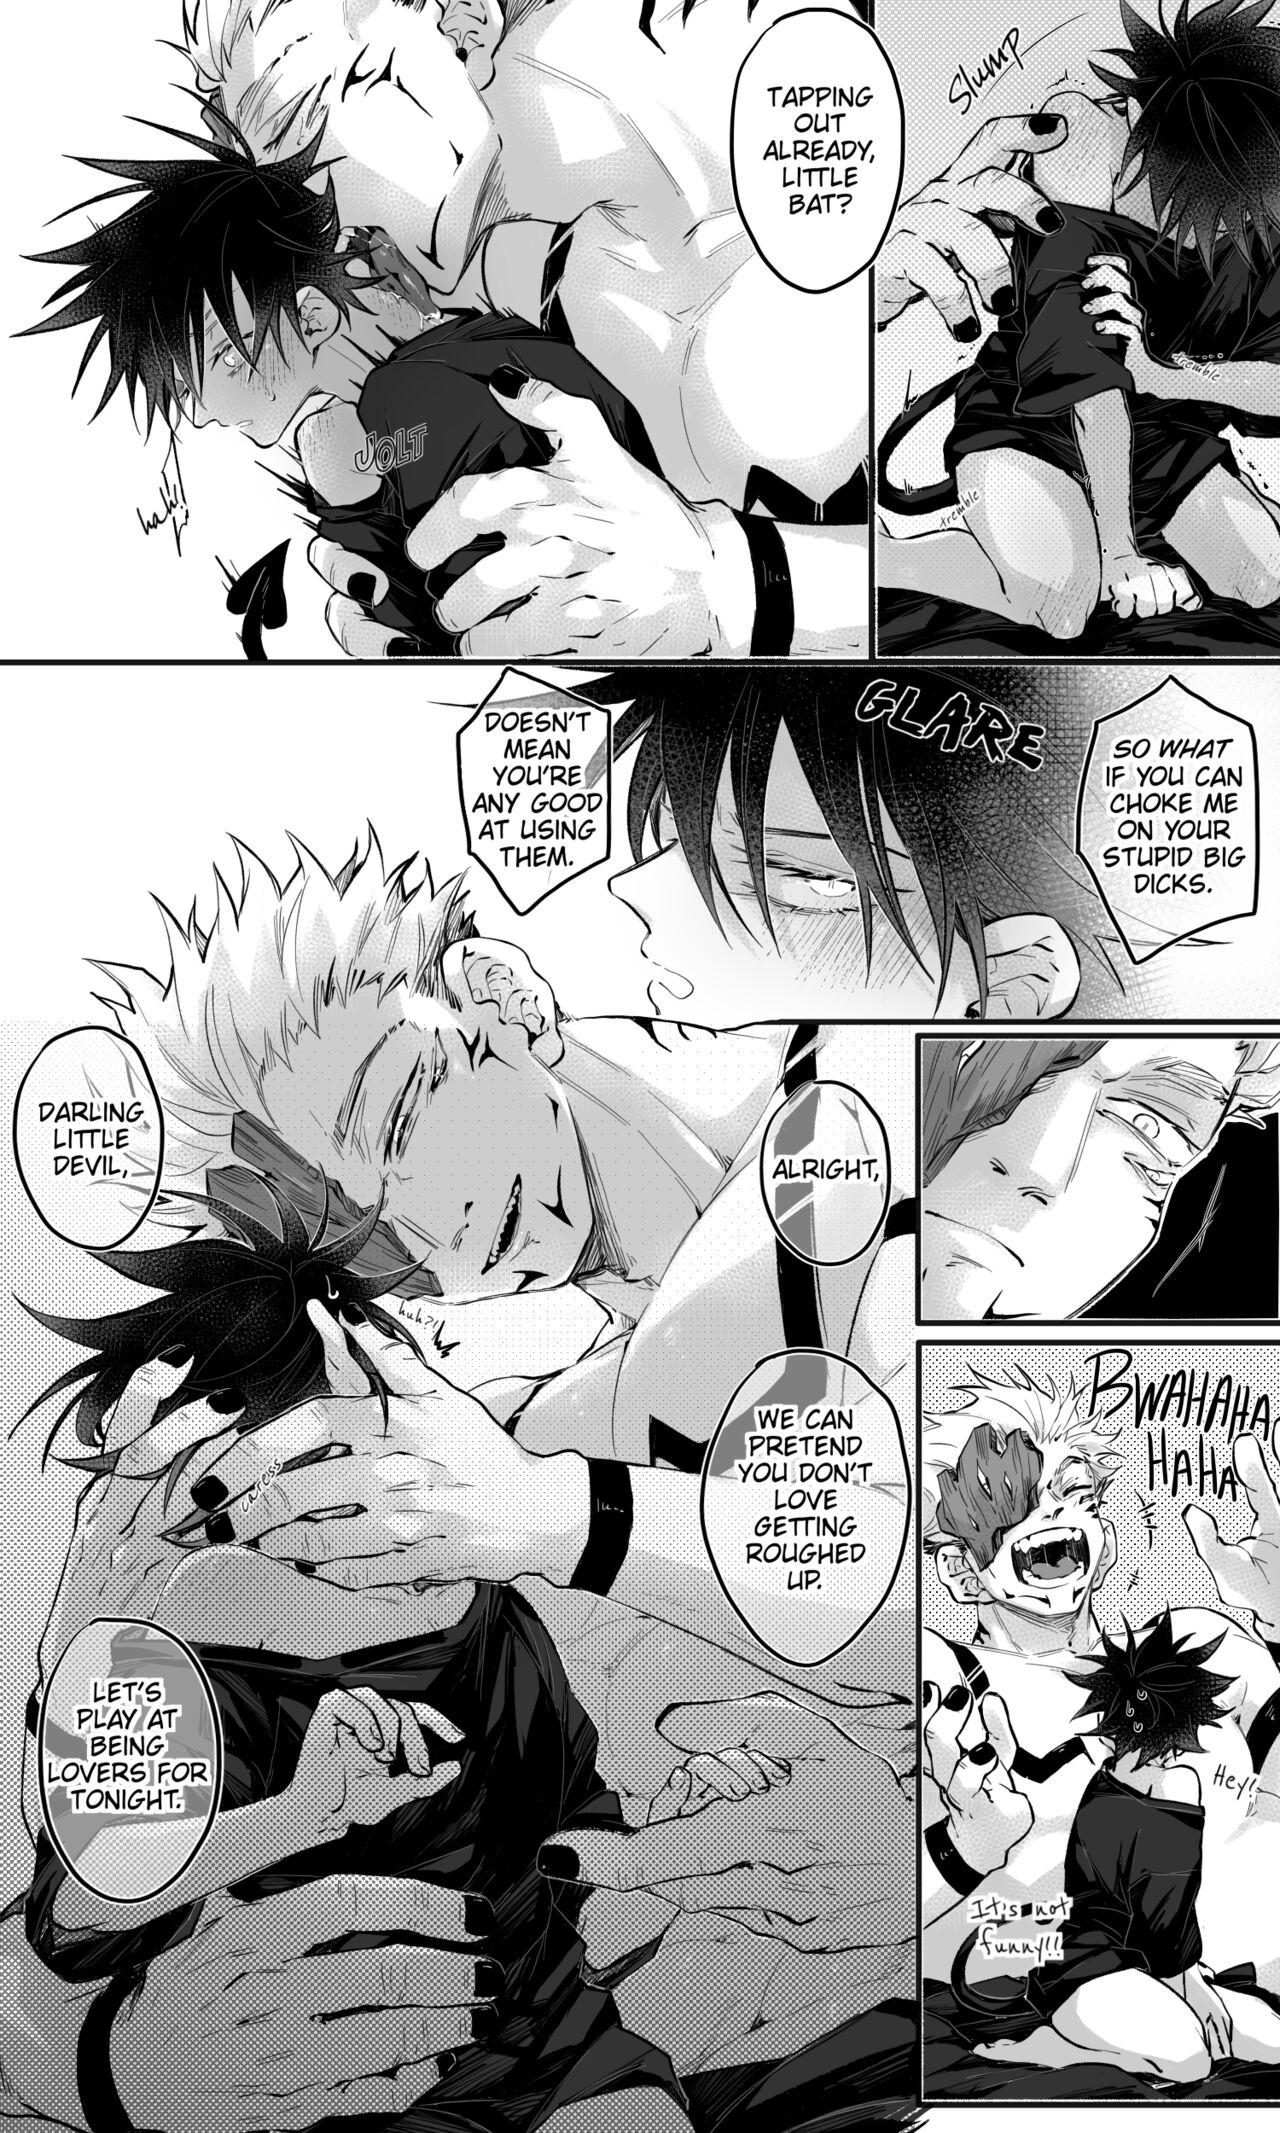 Men OGKuna x Succubus! Megumi for Strad in the skfsit SS event - Jujutsu kaisen Girlongirl - Page 6